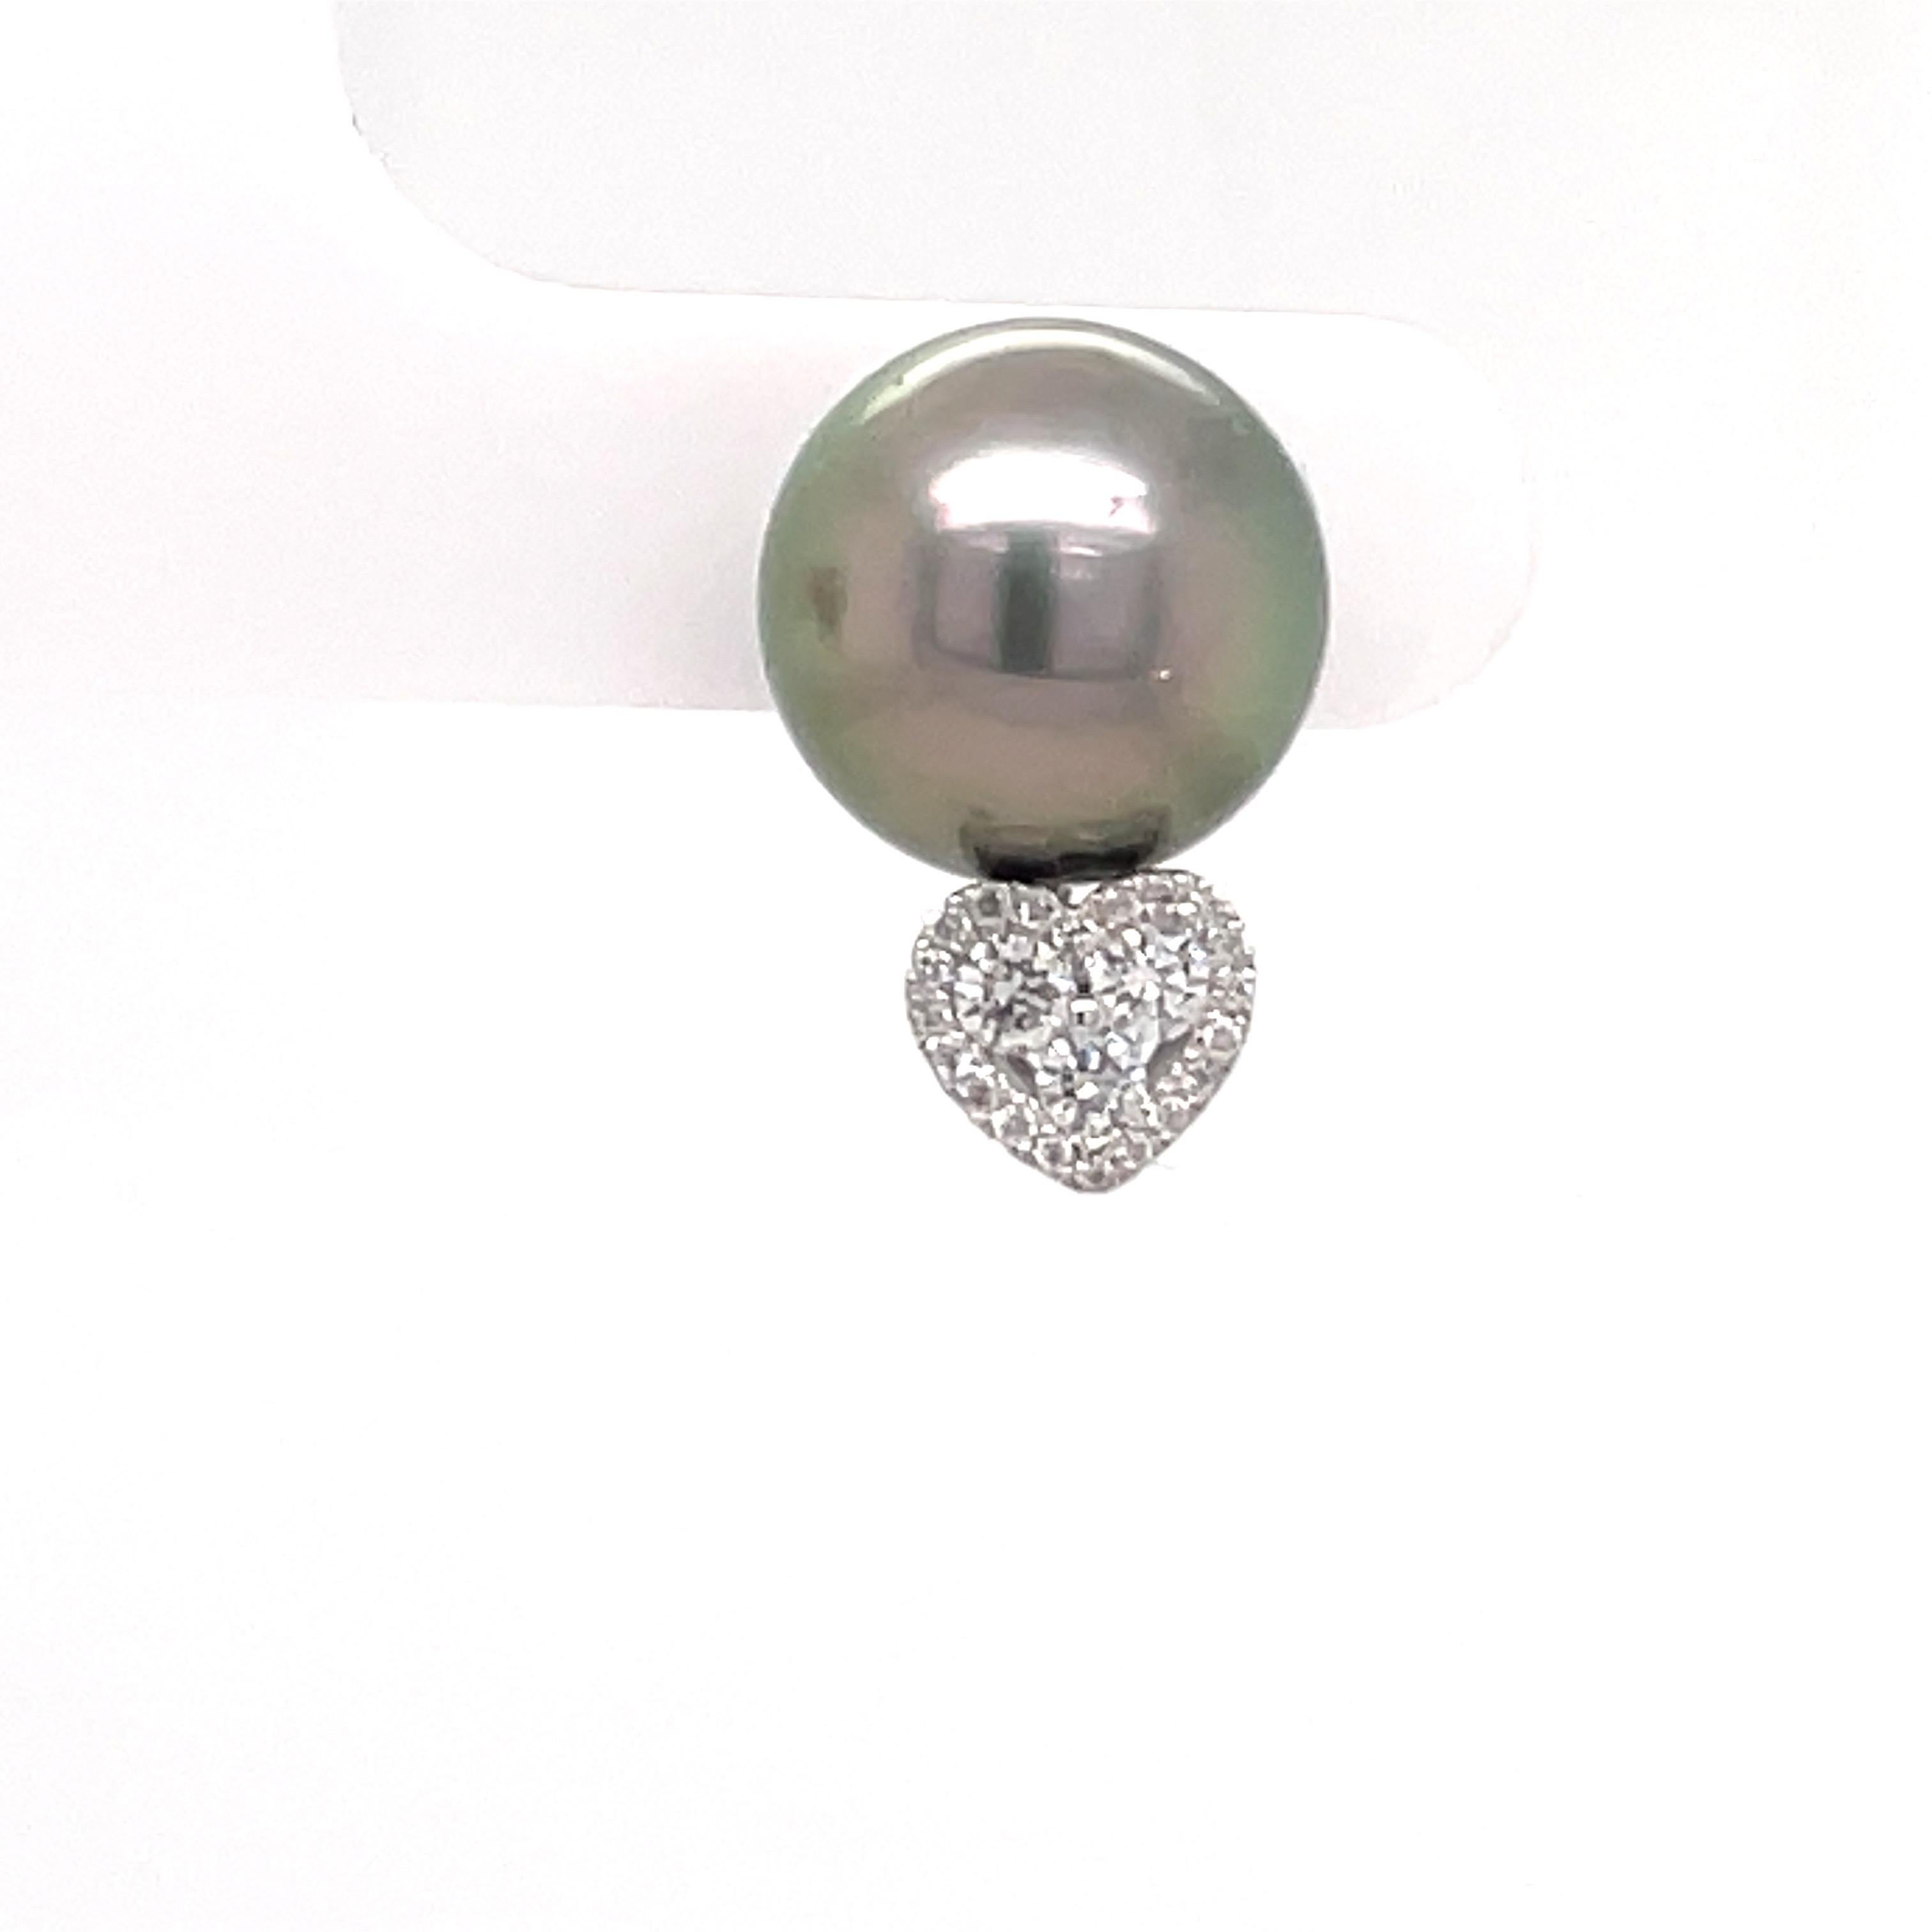 heart 0.25 inches
18K White Gold
46 round diamonds 0.29 cts.
Tahitian Cultured Pearl 10-11 mm
